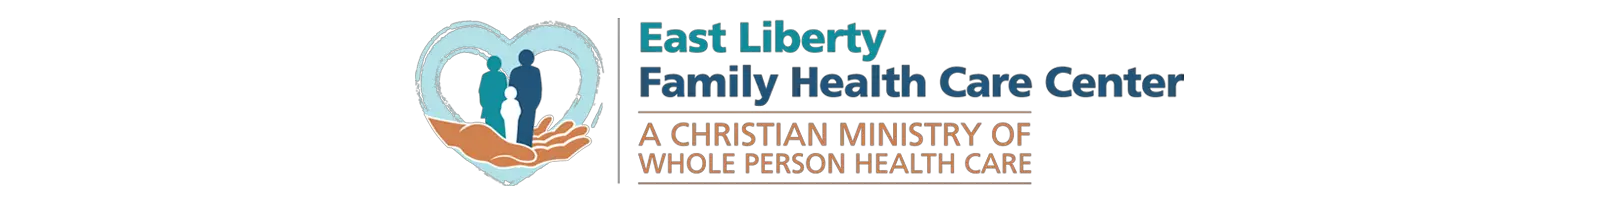 East Liberty Family Health Care Center - Hill District Medical Office